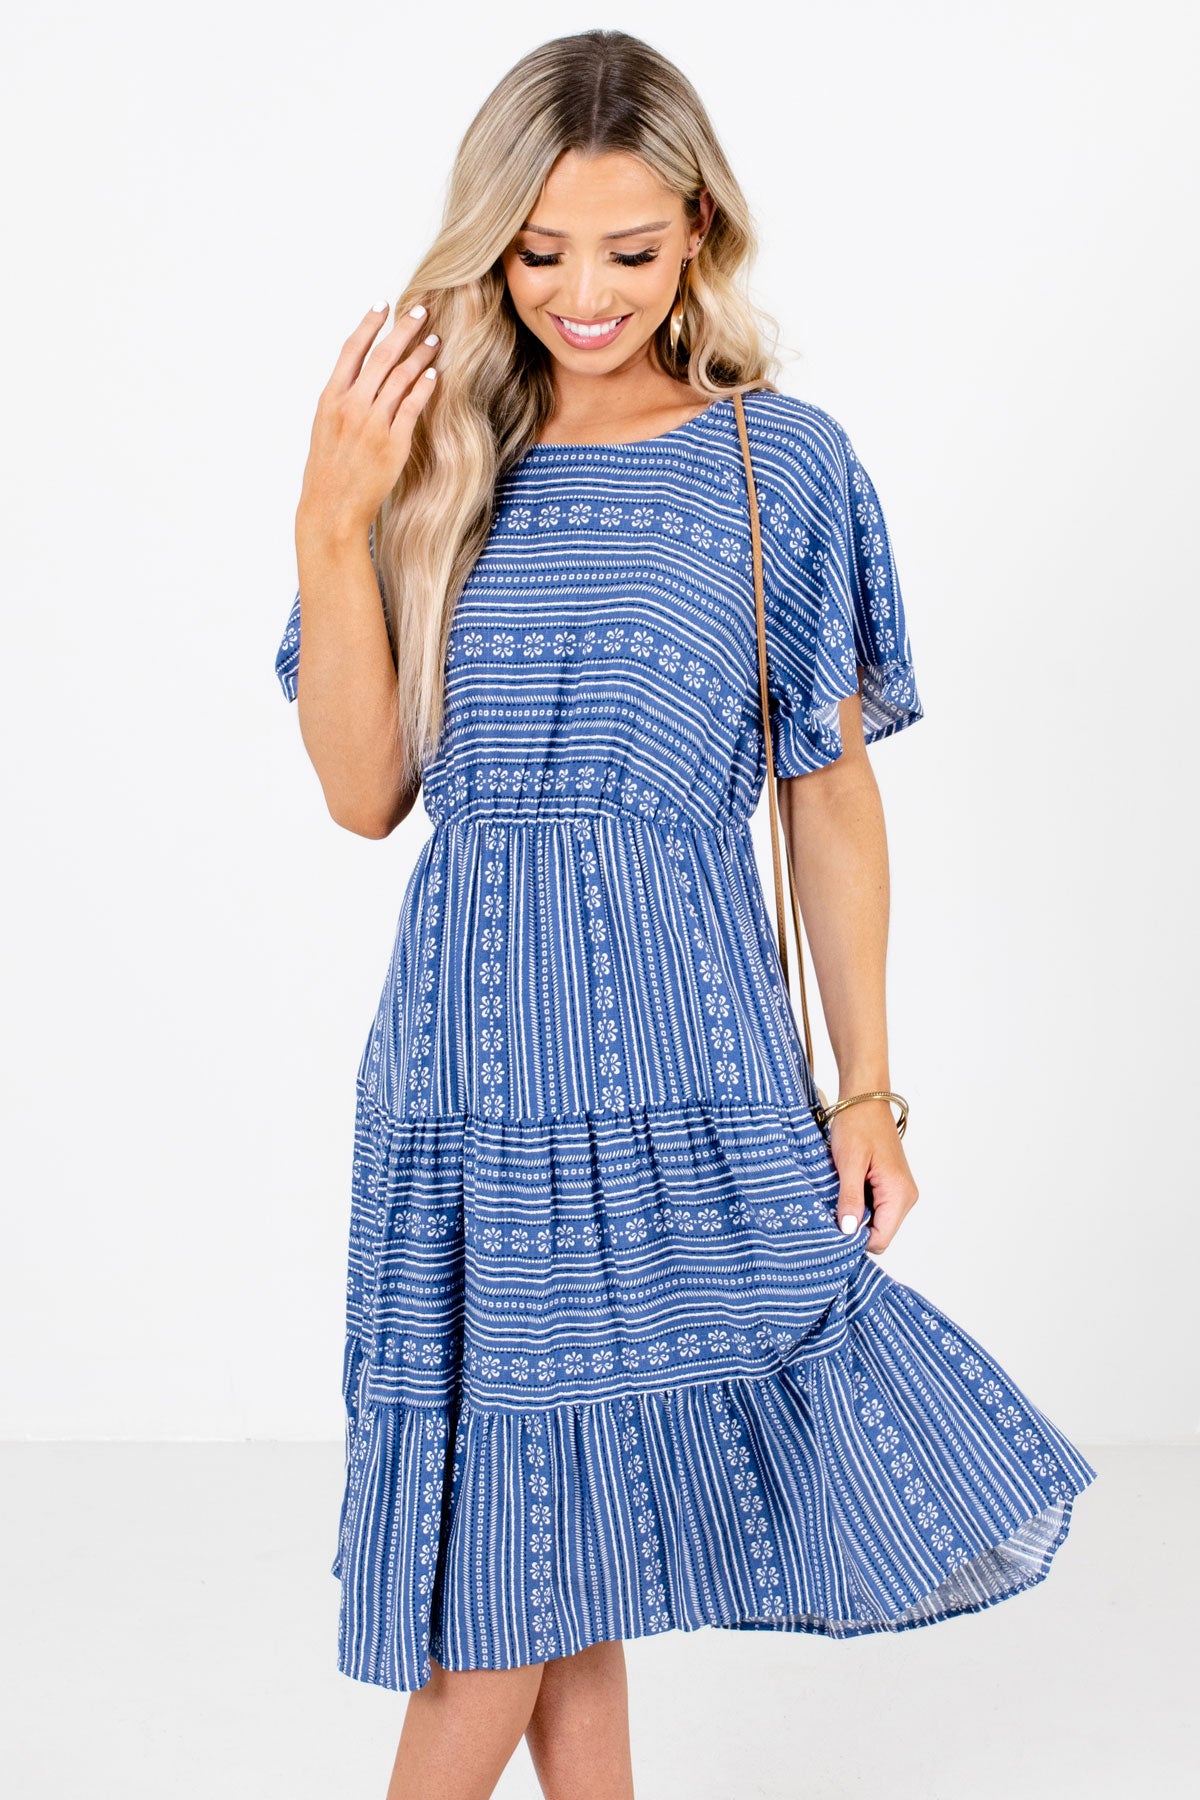 Women's Blue Tiered Ruffle Style Boutique Knee-Length Dress